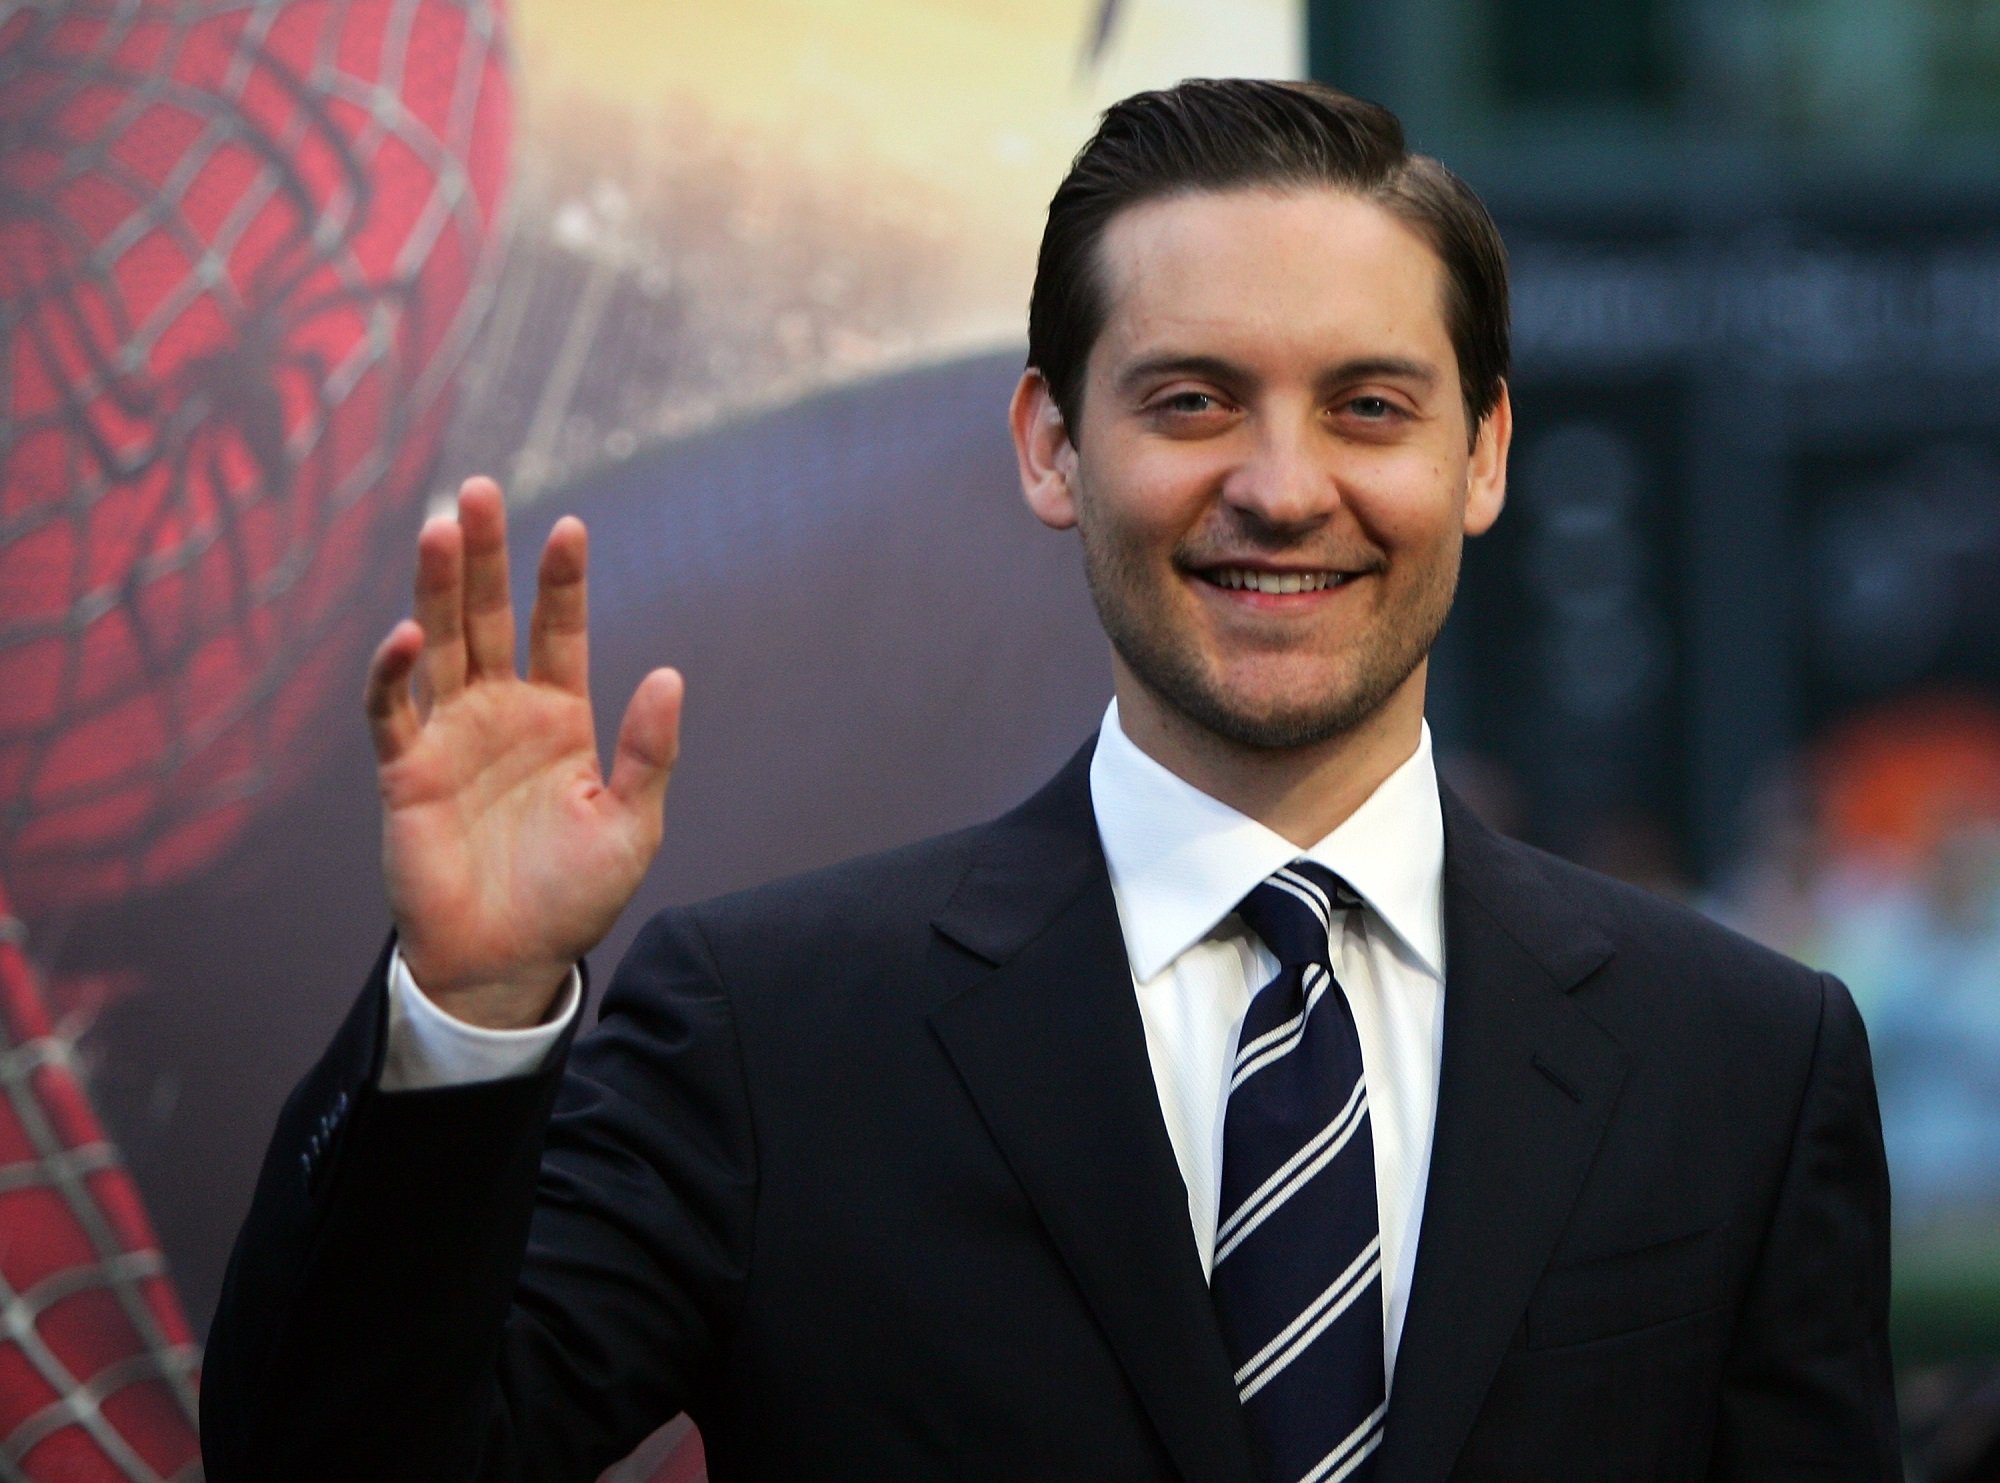 Tobey Maguire News, Pictures, and Videos - E! Online